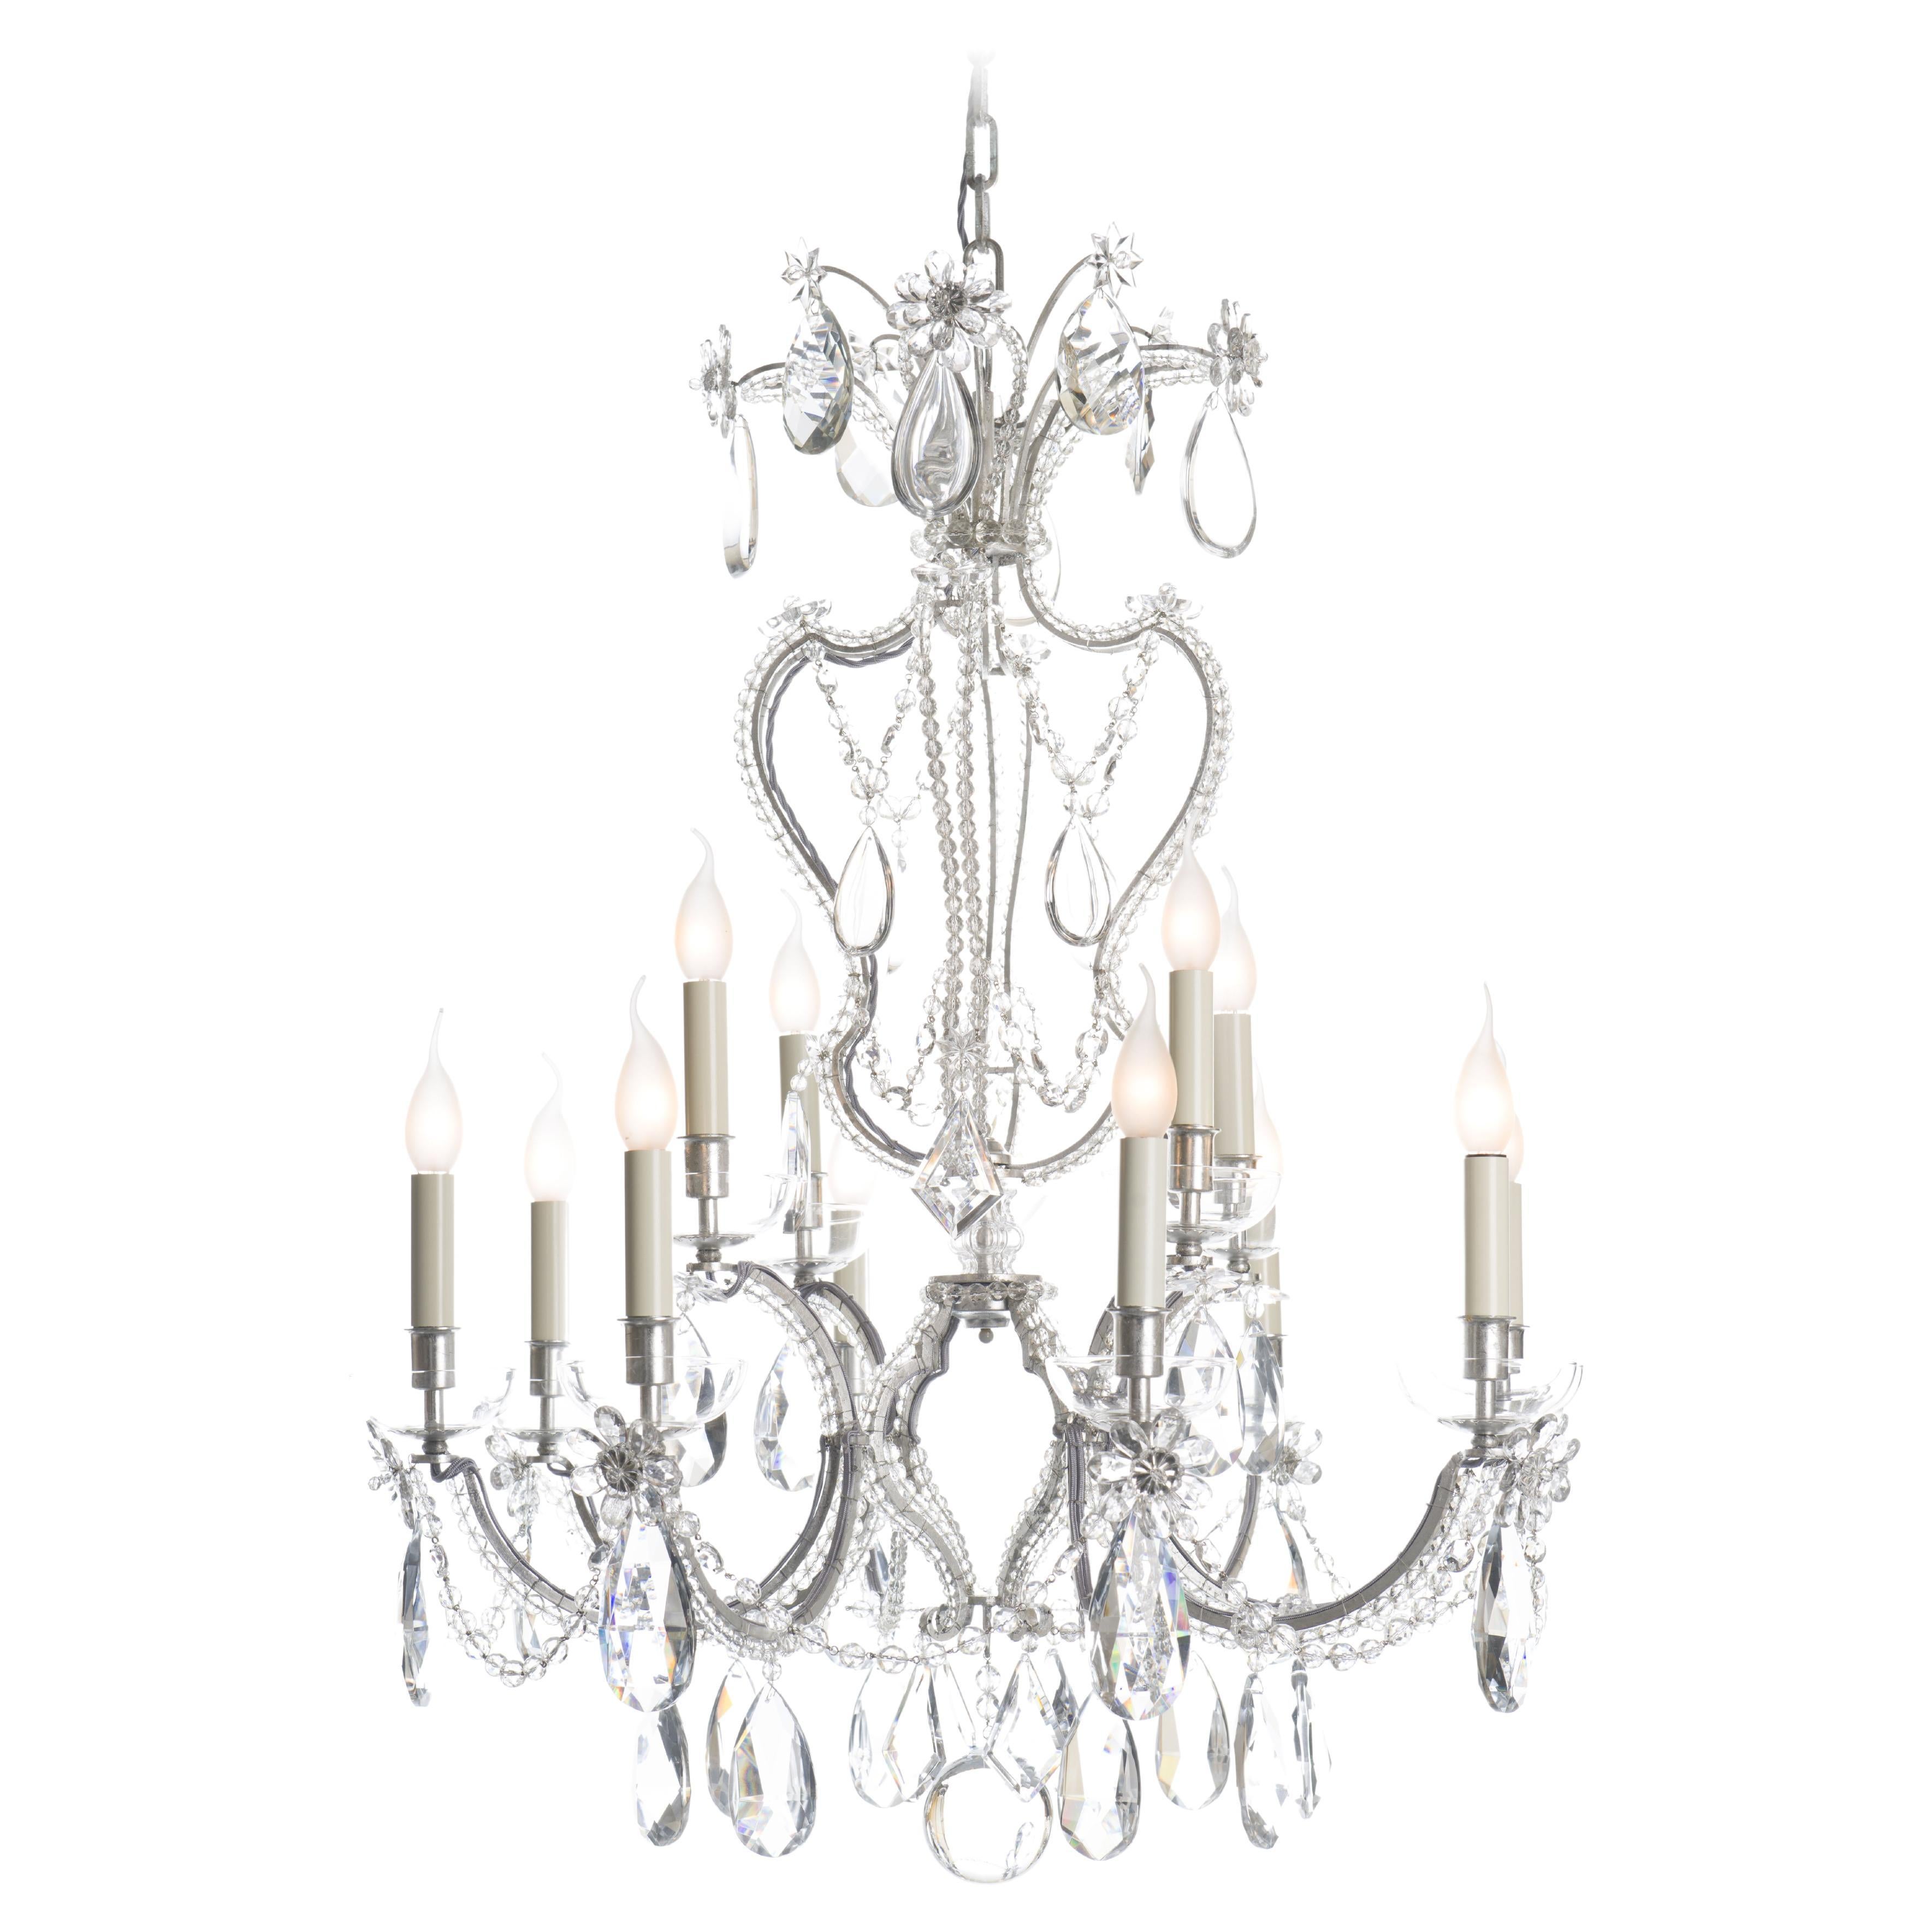 Certified Maison Bagues Chandelier, 26 Lights Iron & Crystal #16811 For Sale